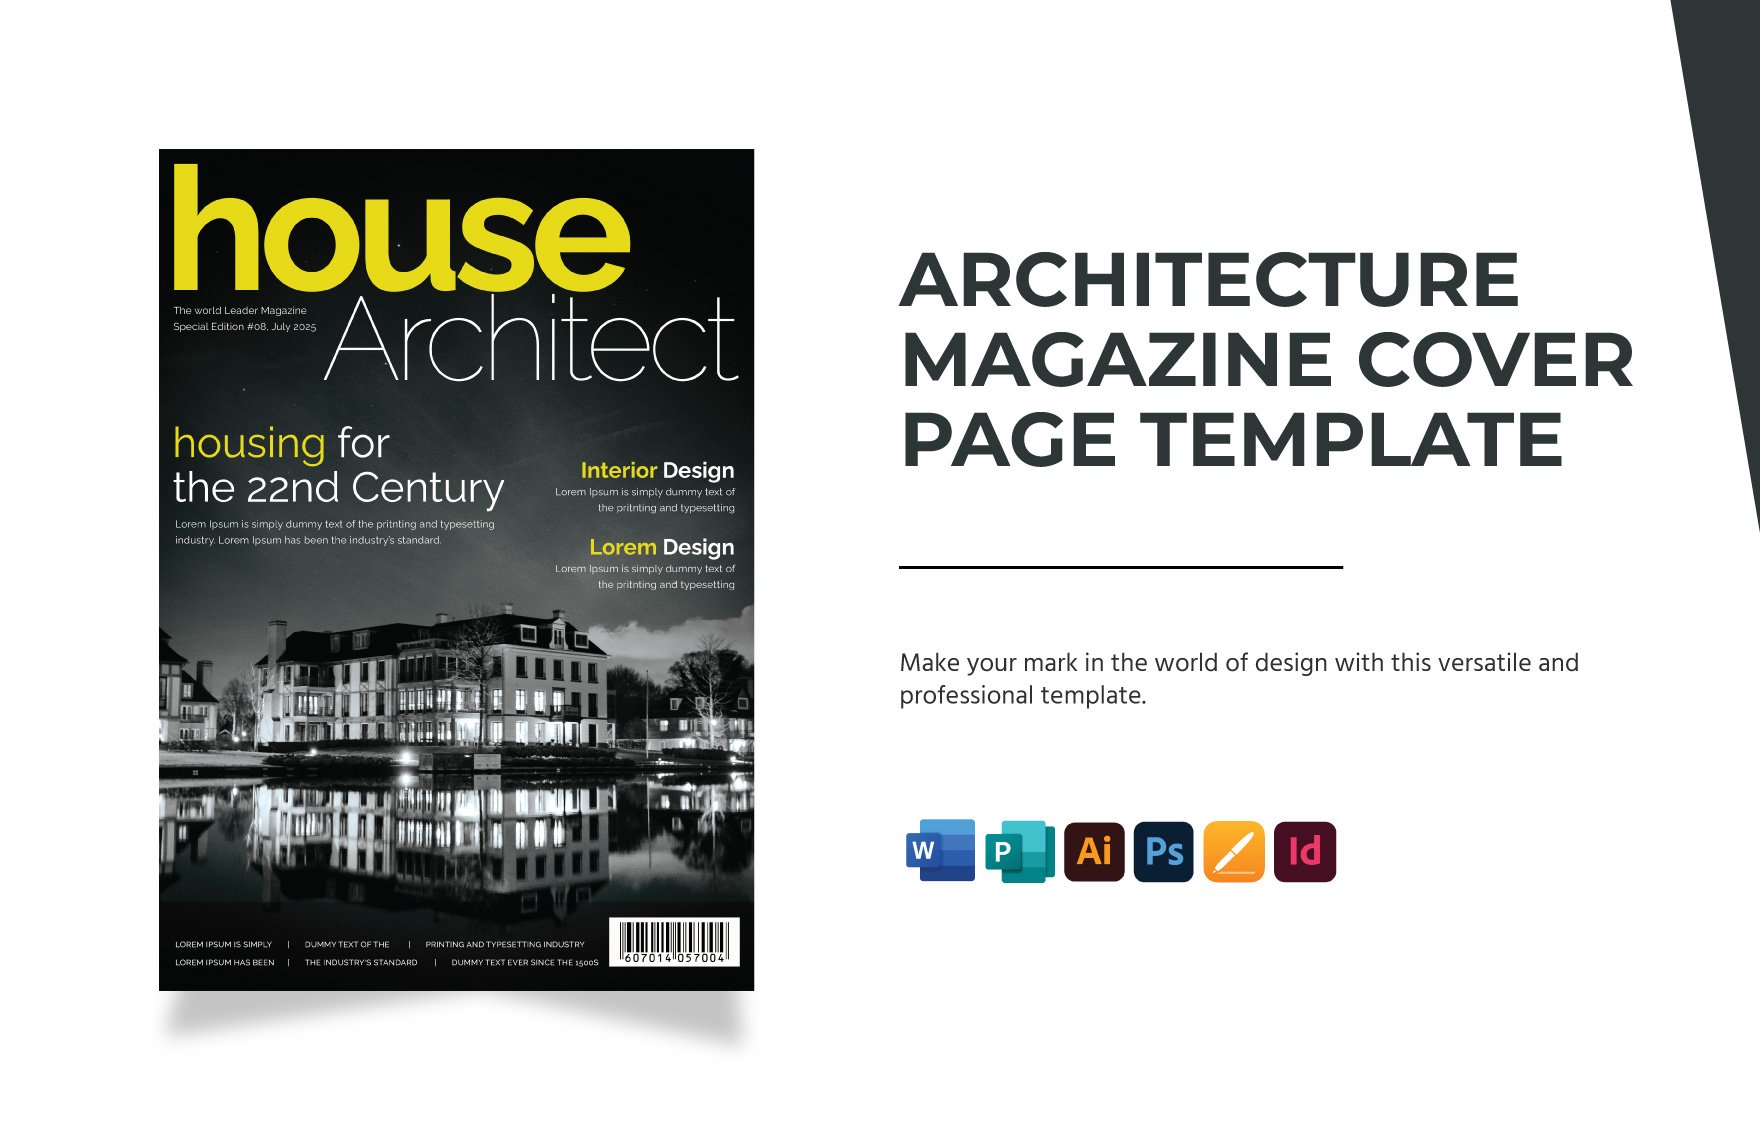 Architecture Magazine Cover Page Template in Word, Illustrator, PSD, Apple Pages, Publisher, InDesign